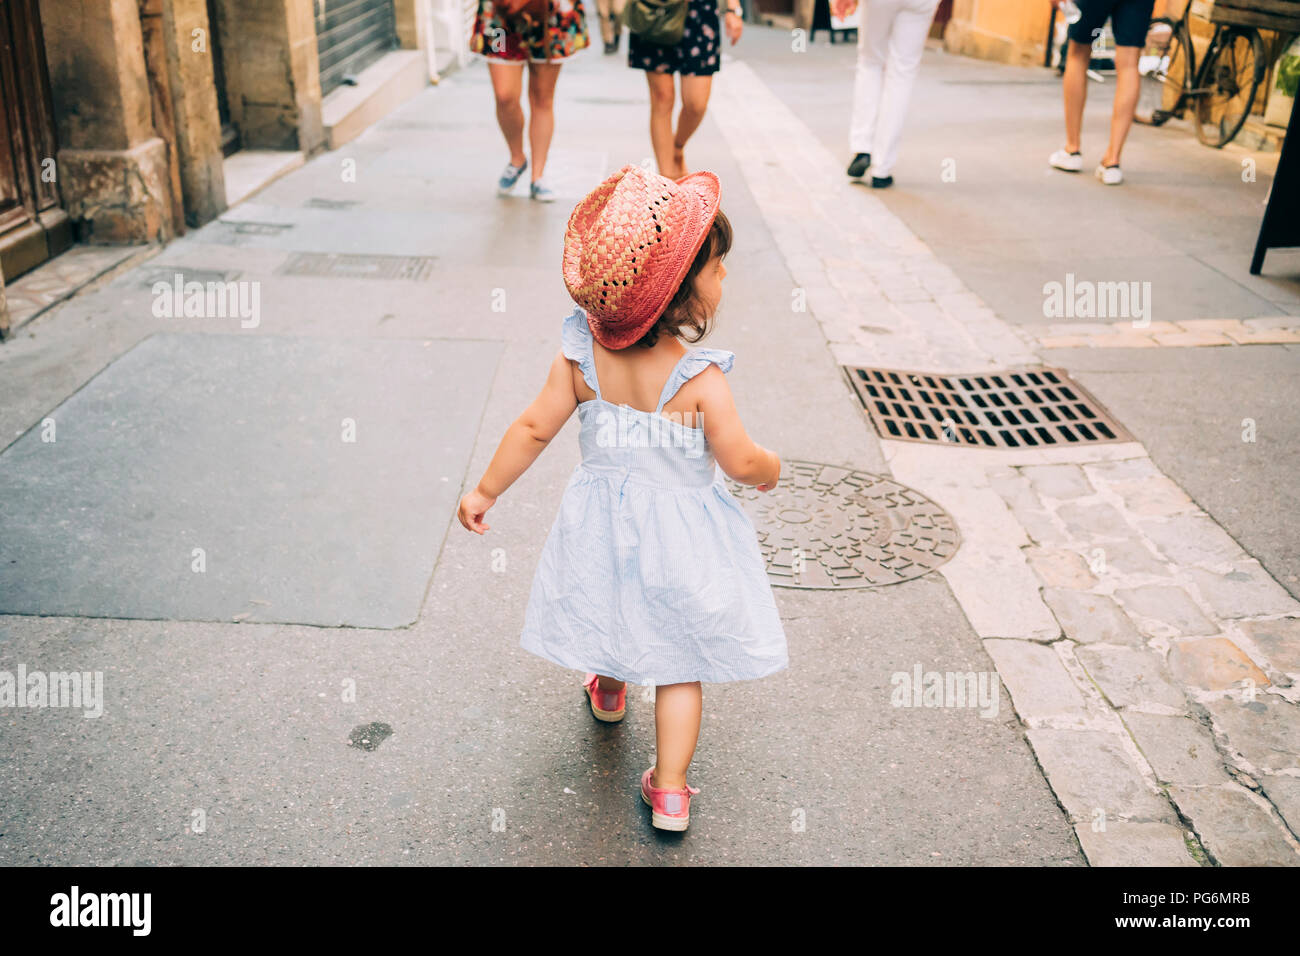 France, Aix-en-Provence, toddler girl walking down the streets of the city center Stock Photo